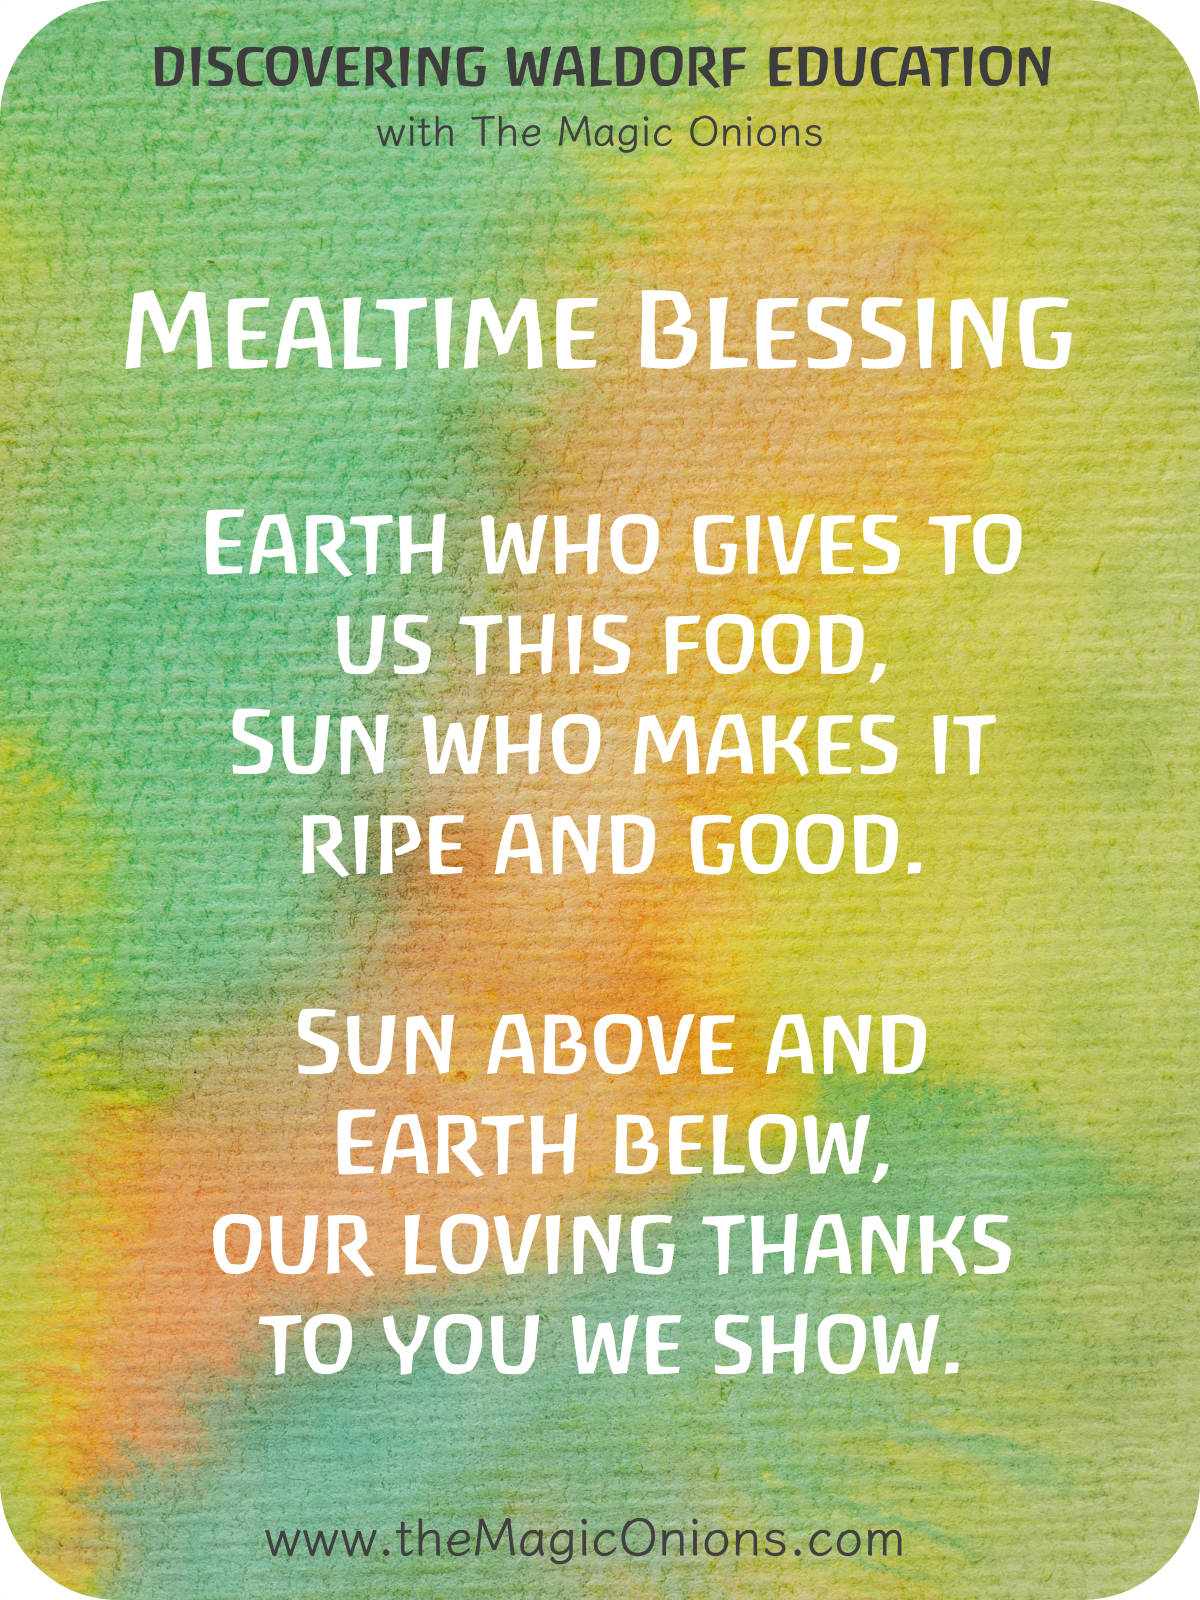 Beautiful Waldorf Mealtime Blessing Verse for Food - Earth wo gives to us this food, sun who makes it ripe and good